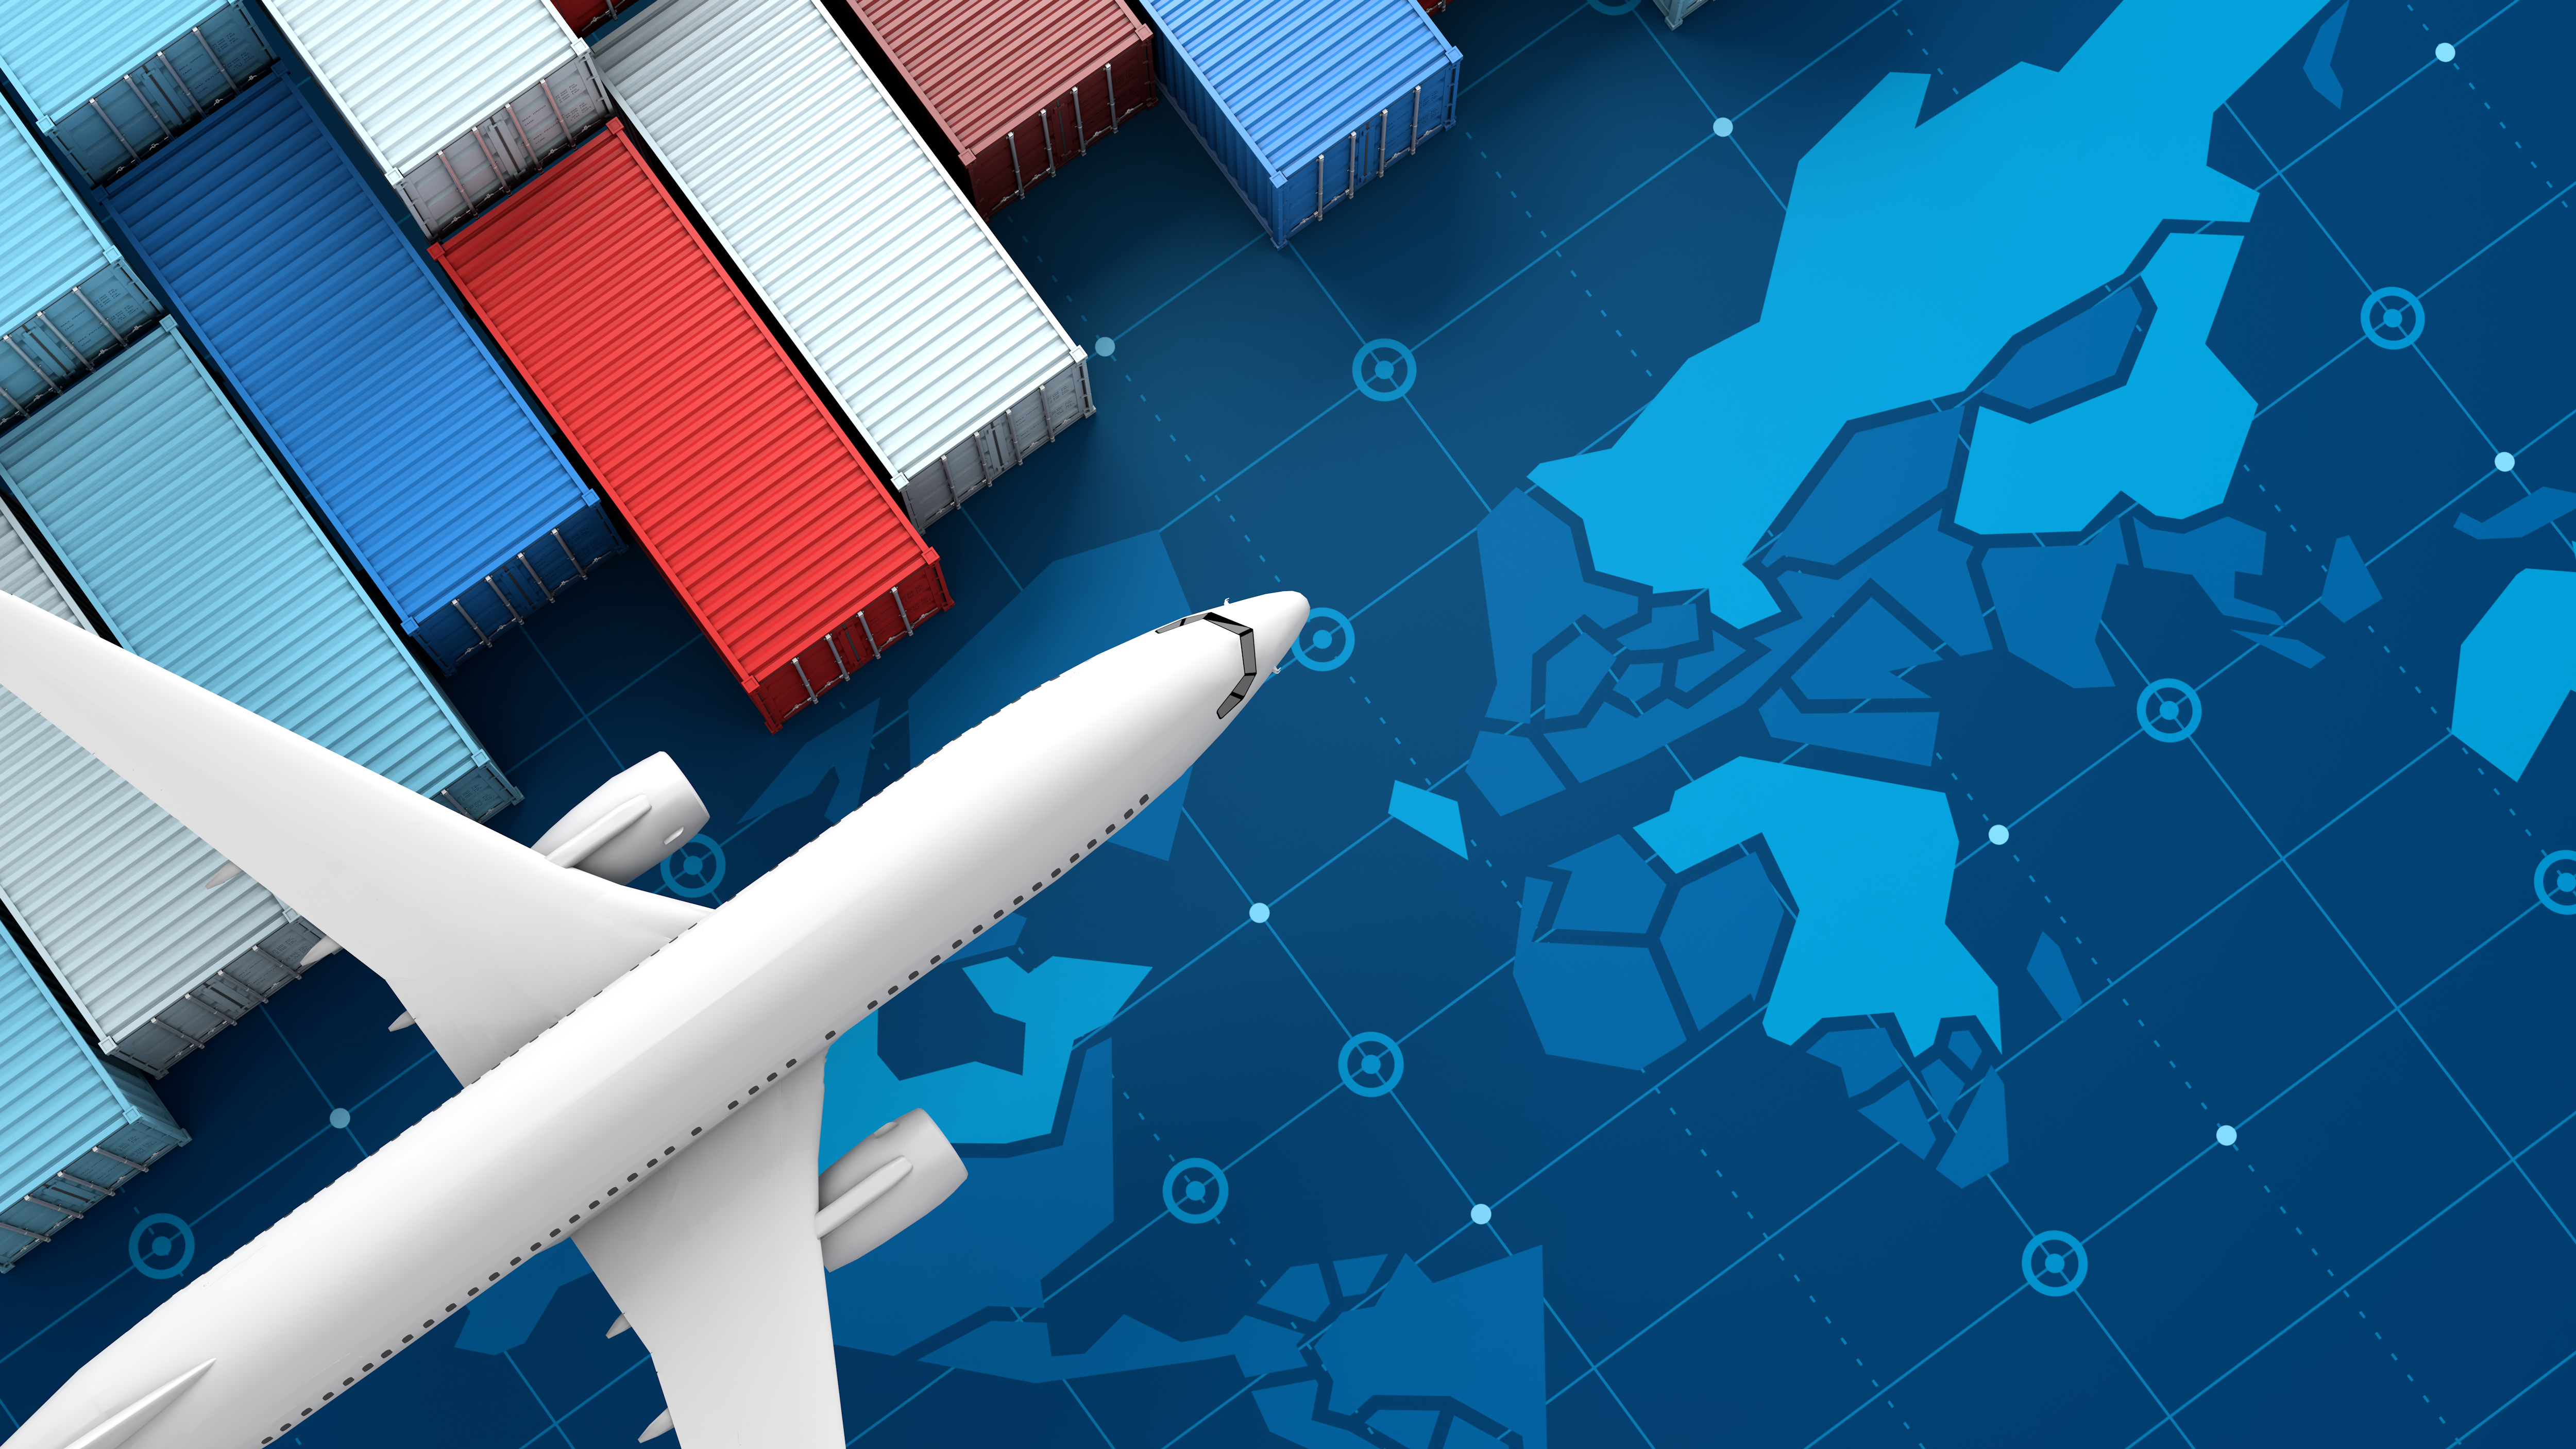 container-cargo-ship-airplane-import-export-business-logistic-digital-world-map (2)